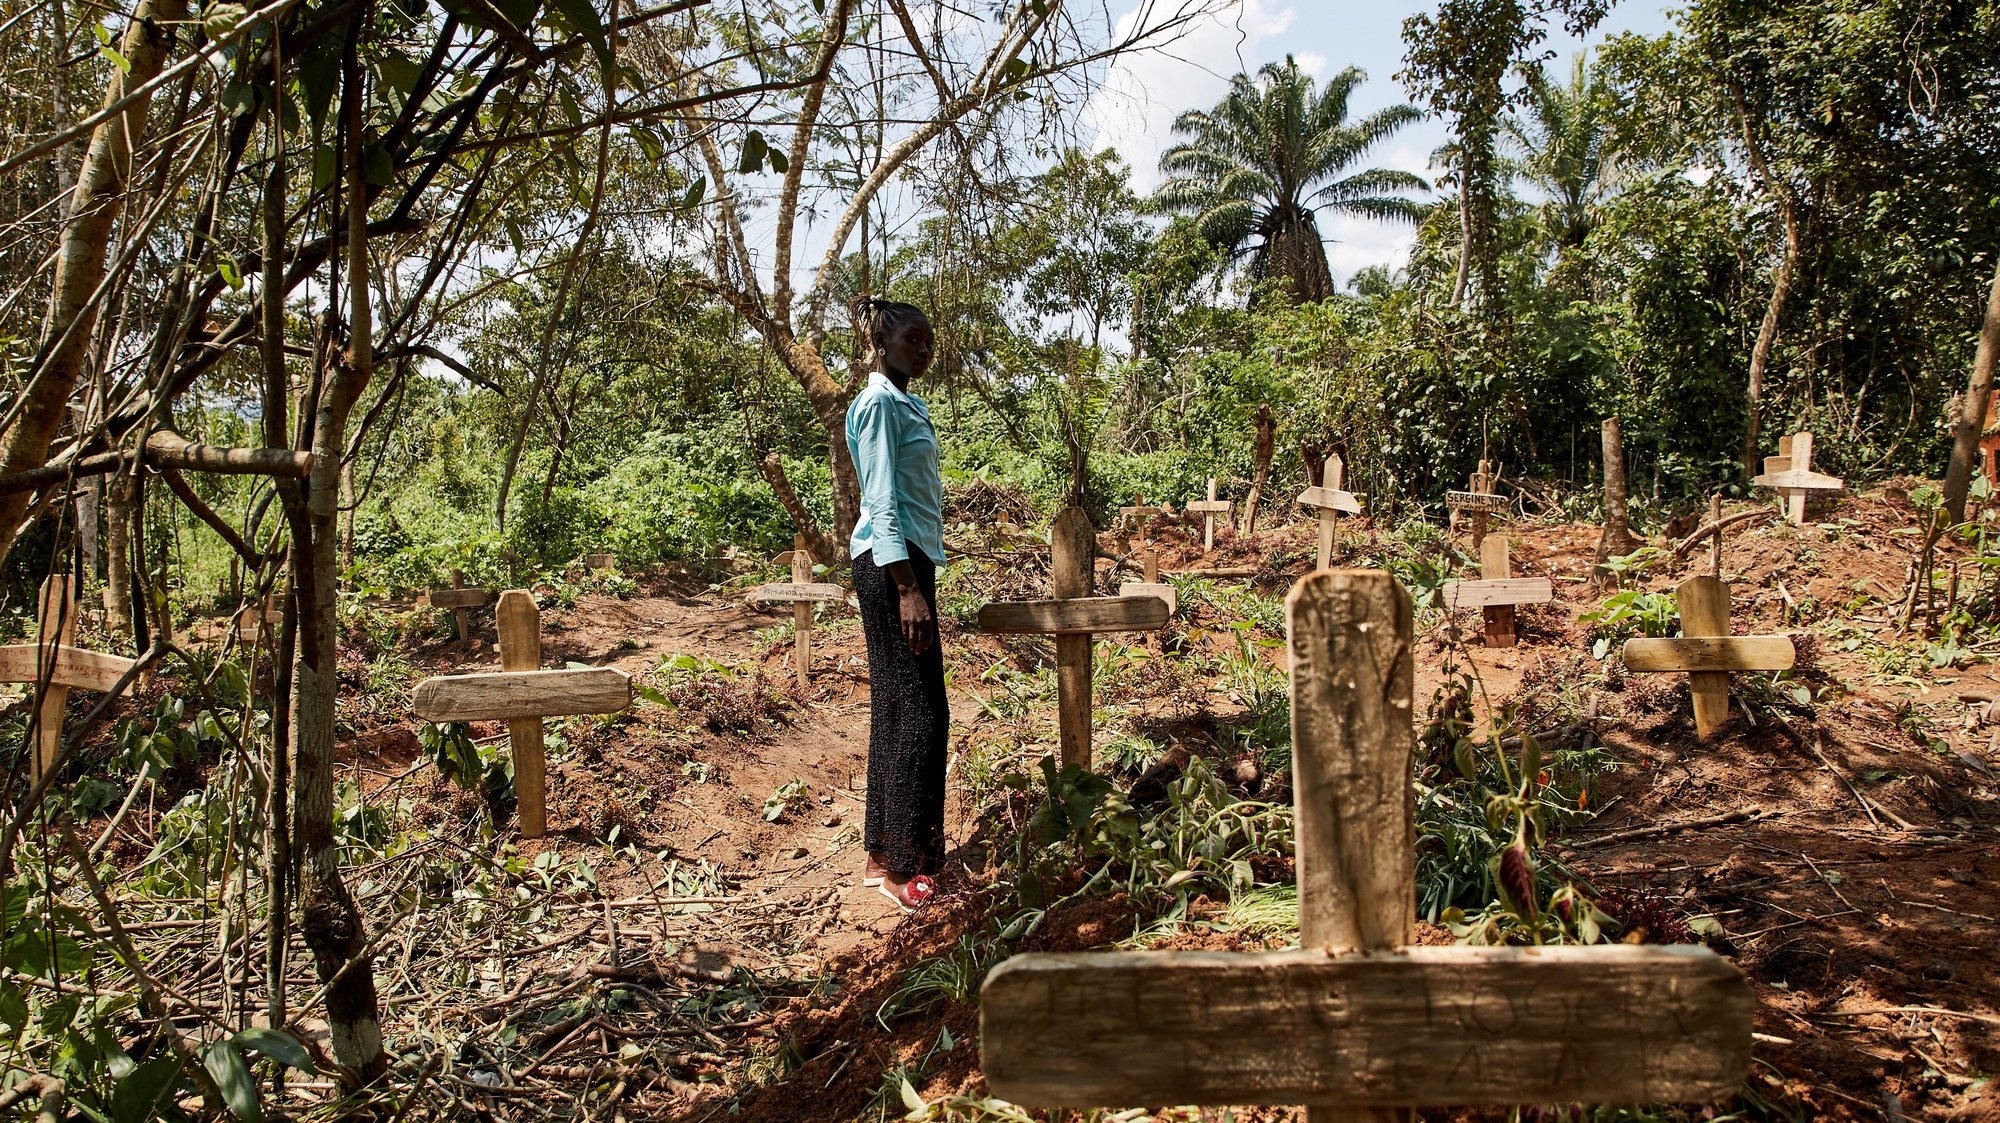 epaselect epa08891328 (19/39) Yvette Adaniya, an Ebola survivor, visits and pays her respects to the grave of her husband at a specially designated site for burials of Ebola victims, to the North of Beni, North Kivu, Democratic Republic of Congo, 14 October 2020. ‘The devil will not distract us again,&#039; says Adaniya, who lost her husband to the virus as this unfamiliar disease broke out in the forests to the North of Beni, North Kivu. &#039;When I had Ebola, my whole body and soul were affected. I lost weight and became bruised and black. I was throwing up, with diarrhea and headaches. 
I feel like I am recovered, but I don’t have any strength like before. My body became weak, not like it used to be. 
In my family, it killed 2 people, my husband, and my brother-in-law. 
When it arrived in the village, we got infected at the health center, my husband was ill [with another sickness] so we took him to the health center nearest the village. We shared the same room with a person affected by Ebola, who was about to be collected by an ambulance. 
We weren’t sure what it was, yes they would tell us it was Ebola, but this disease was like a demon, we did not listen to the information, we thought it was about politics, not a disease. We did not rush to the health center; rumors spread that people don’t leave the health center: that [our ethnic group] Nande, would never leave there. 
Advice for people suffering with this Corona, Covid-19. We need to be flexible, washing hands, use hygiene. The devil will not distract us again, we were like fools, and we did not listen. This time we need to be flexible to follow and respect what  doctors say.&#039;  EPA/Hugh Kinsella Cunningham ATTENTION EDITORS / MANDATORY CREDIT : This story was produced in partnership with the Pulitzer Center -- For the full PHOTO ESSAY text please see Advisory Notice epa...